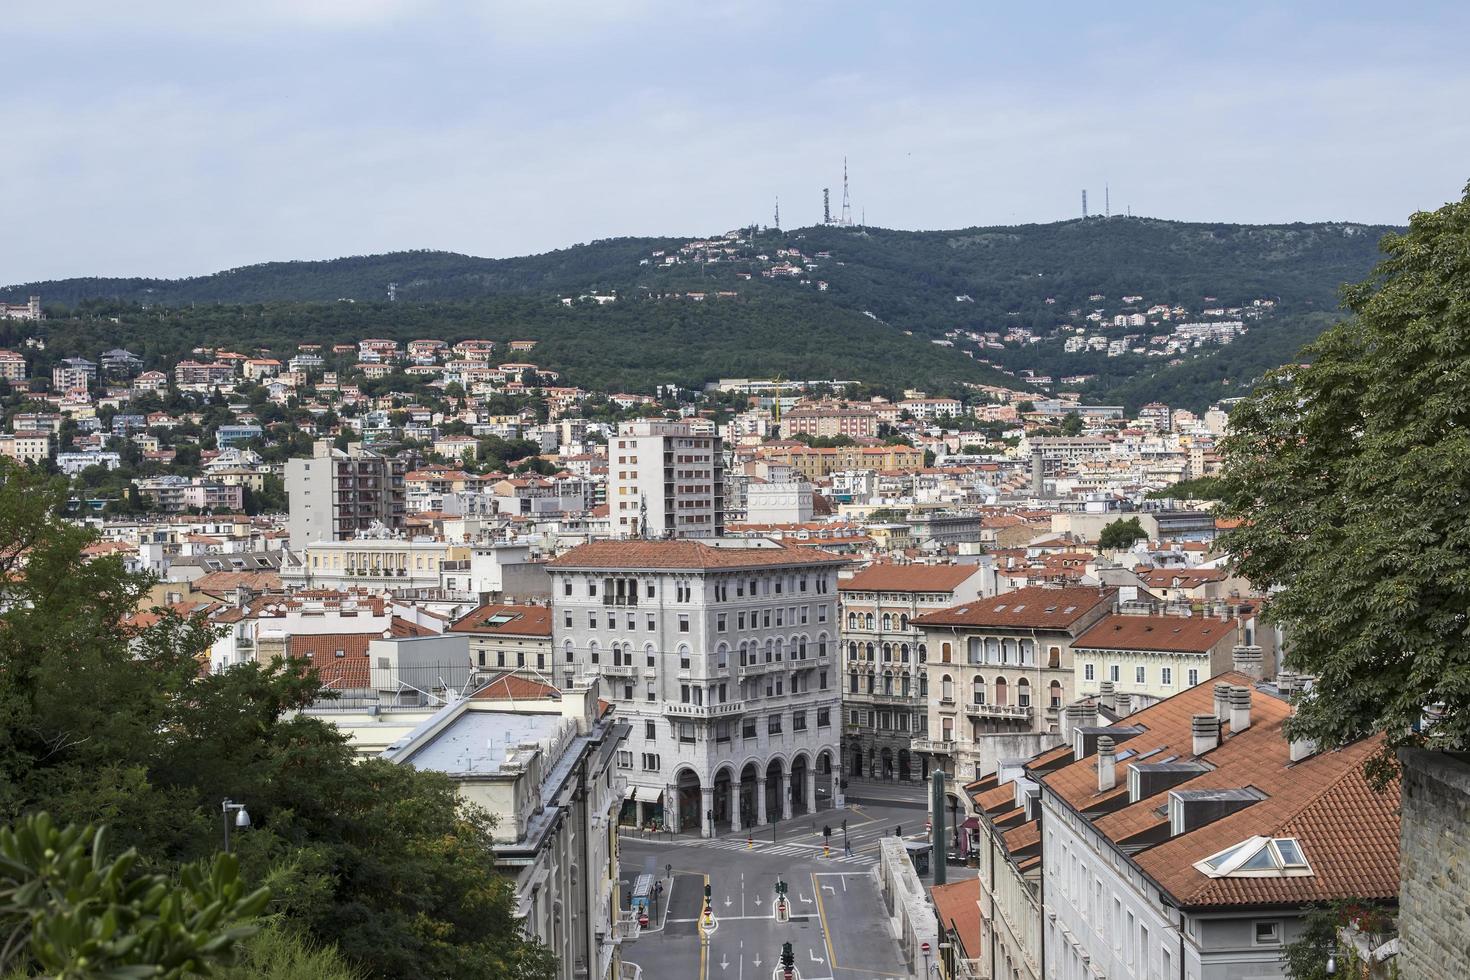 TRIESTE, ITALY, JULY 1, 2018 - View at street of Trieste, Italy. Trieste is the capital city of the Friuli Venezia Giulia region in northeast Italy. photo